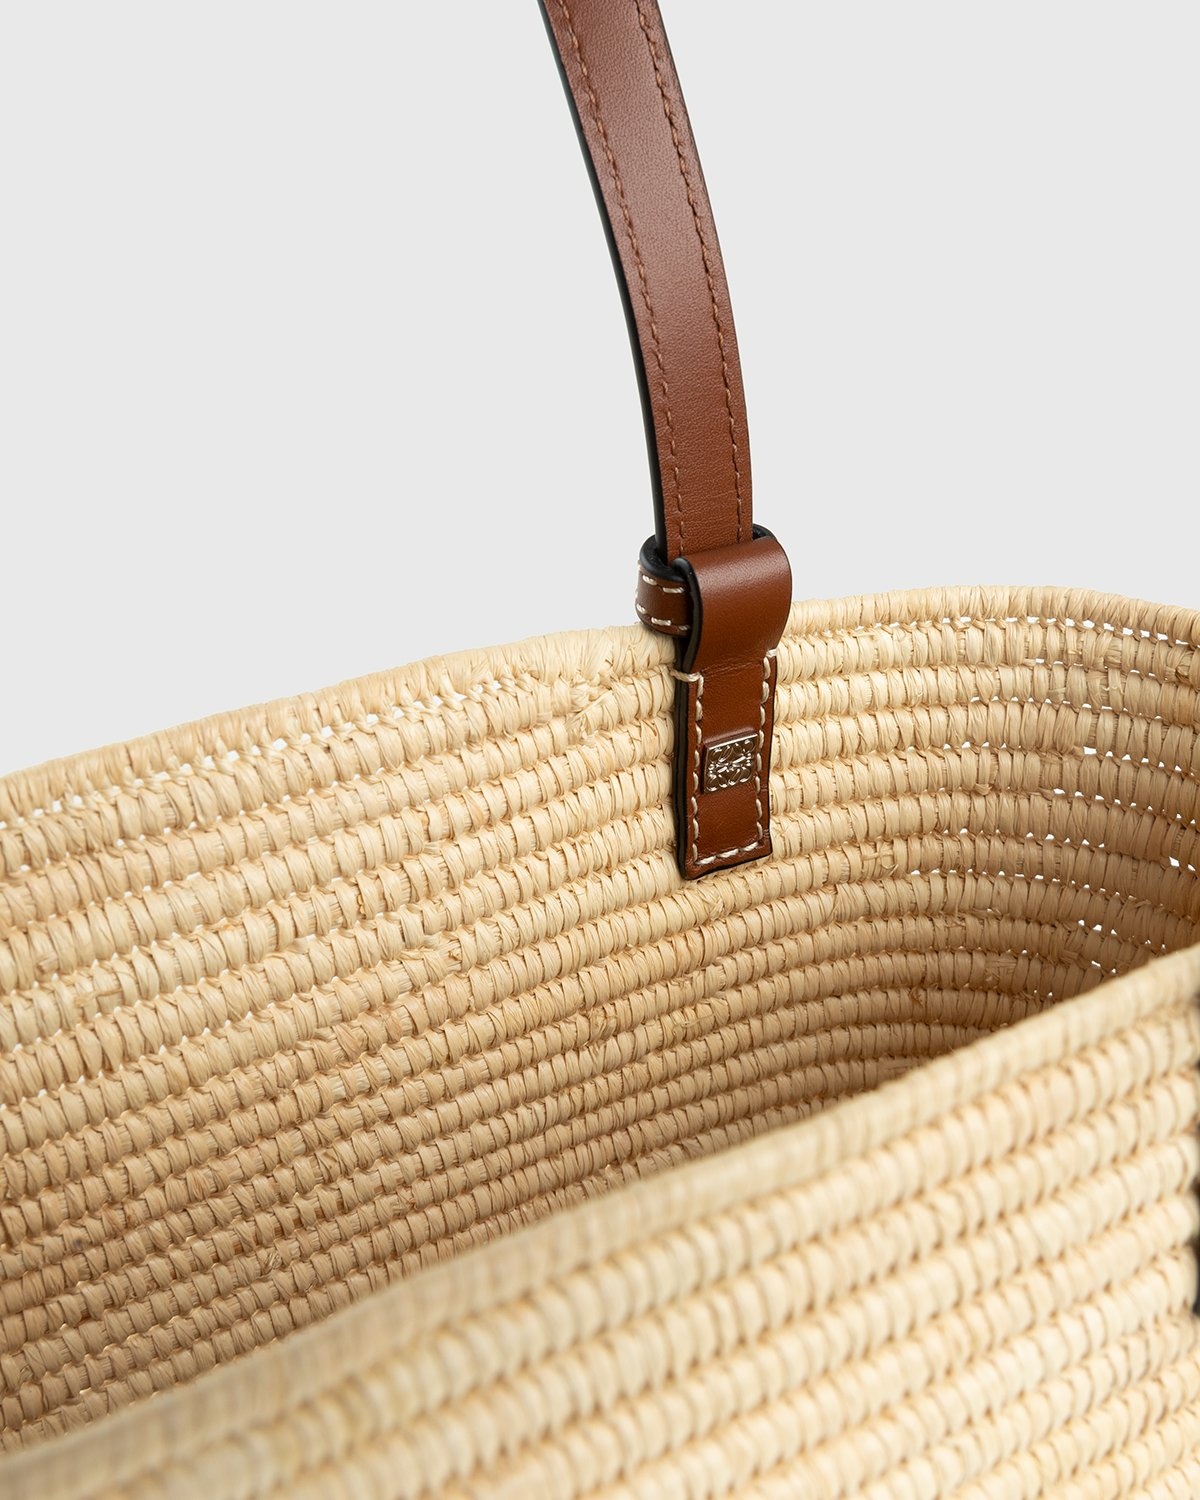 LOEWE Basket Bag in Palm Leaf and Calfskin Natural/White in Calfskin  Leather - US